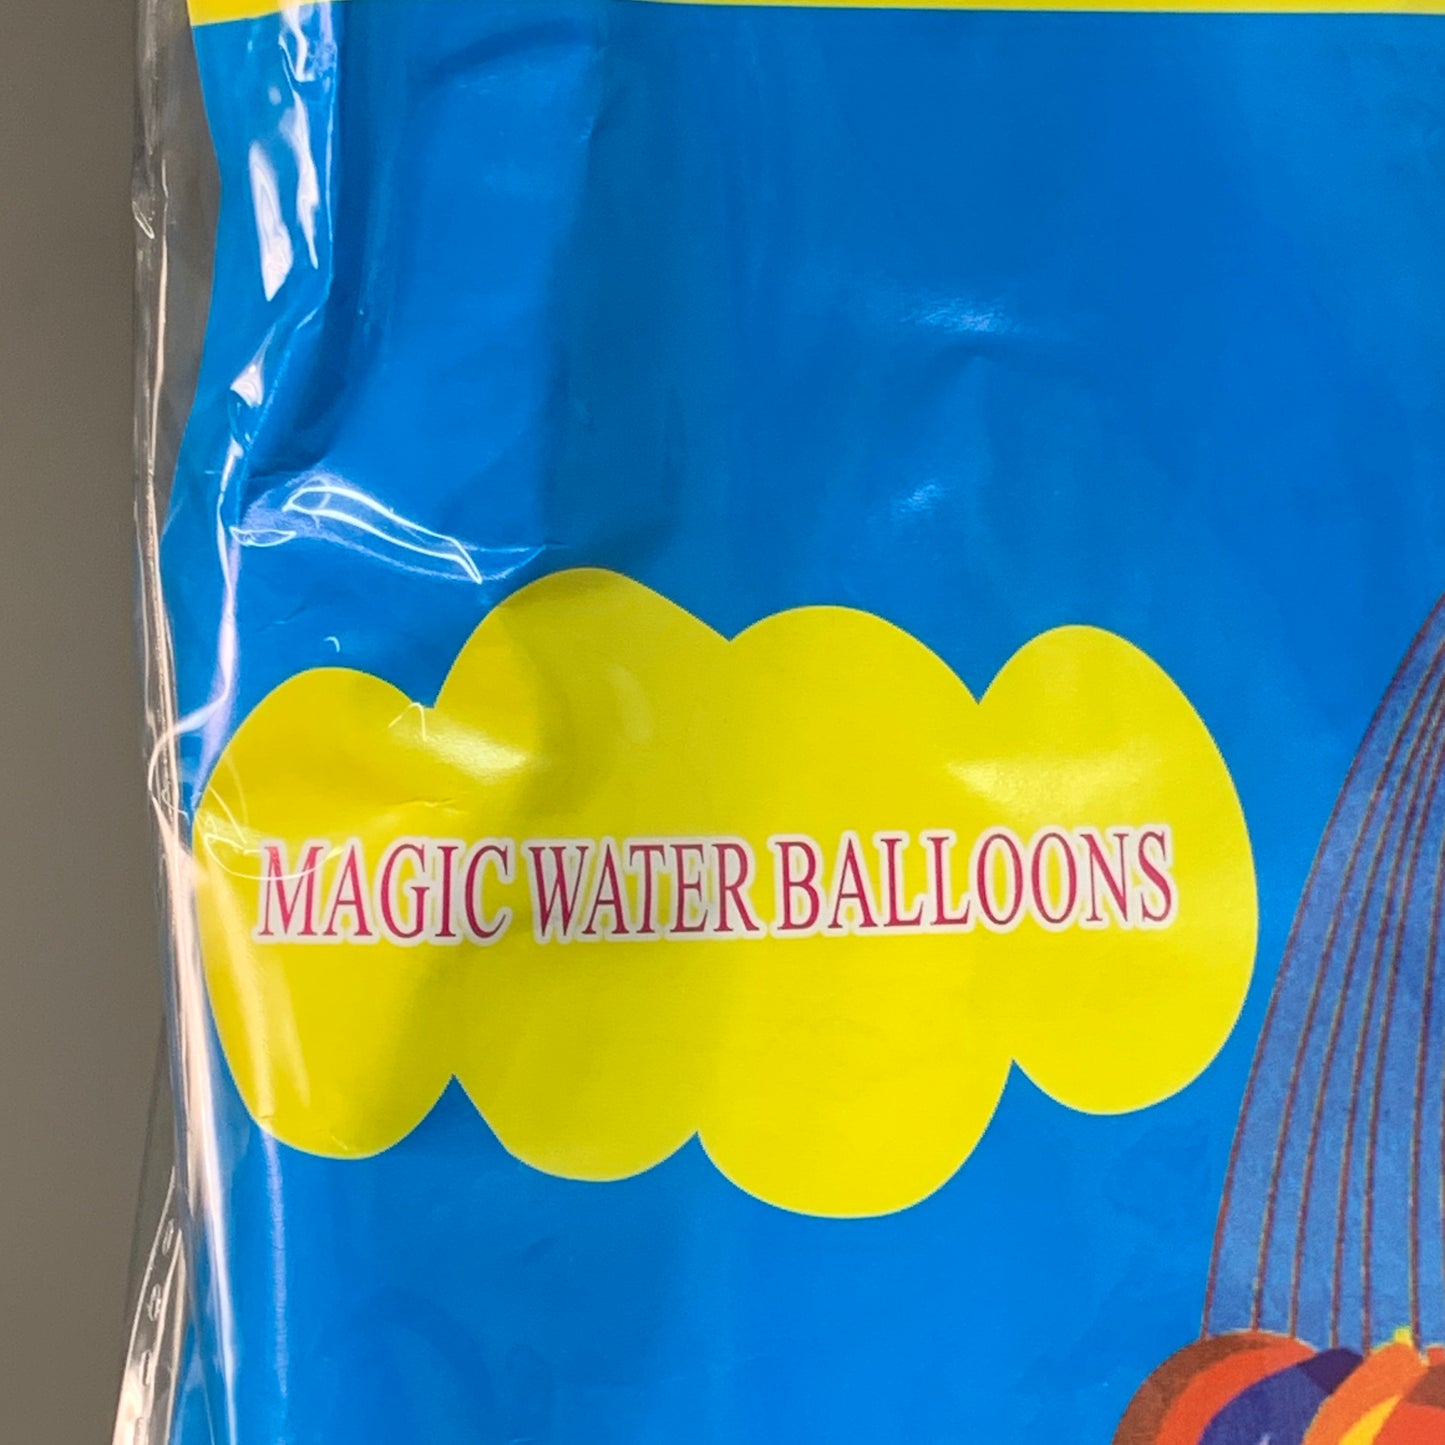 MAGIC BALLOONS 4 PACKS of 4! (592 Balloons) Instant Self-Tie, Self-Seal Balloons (New)